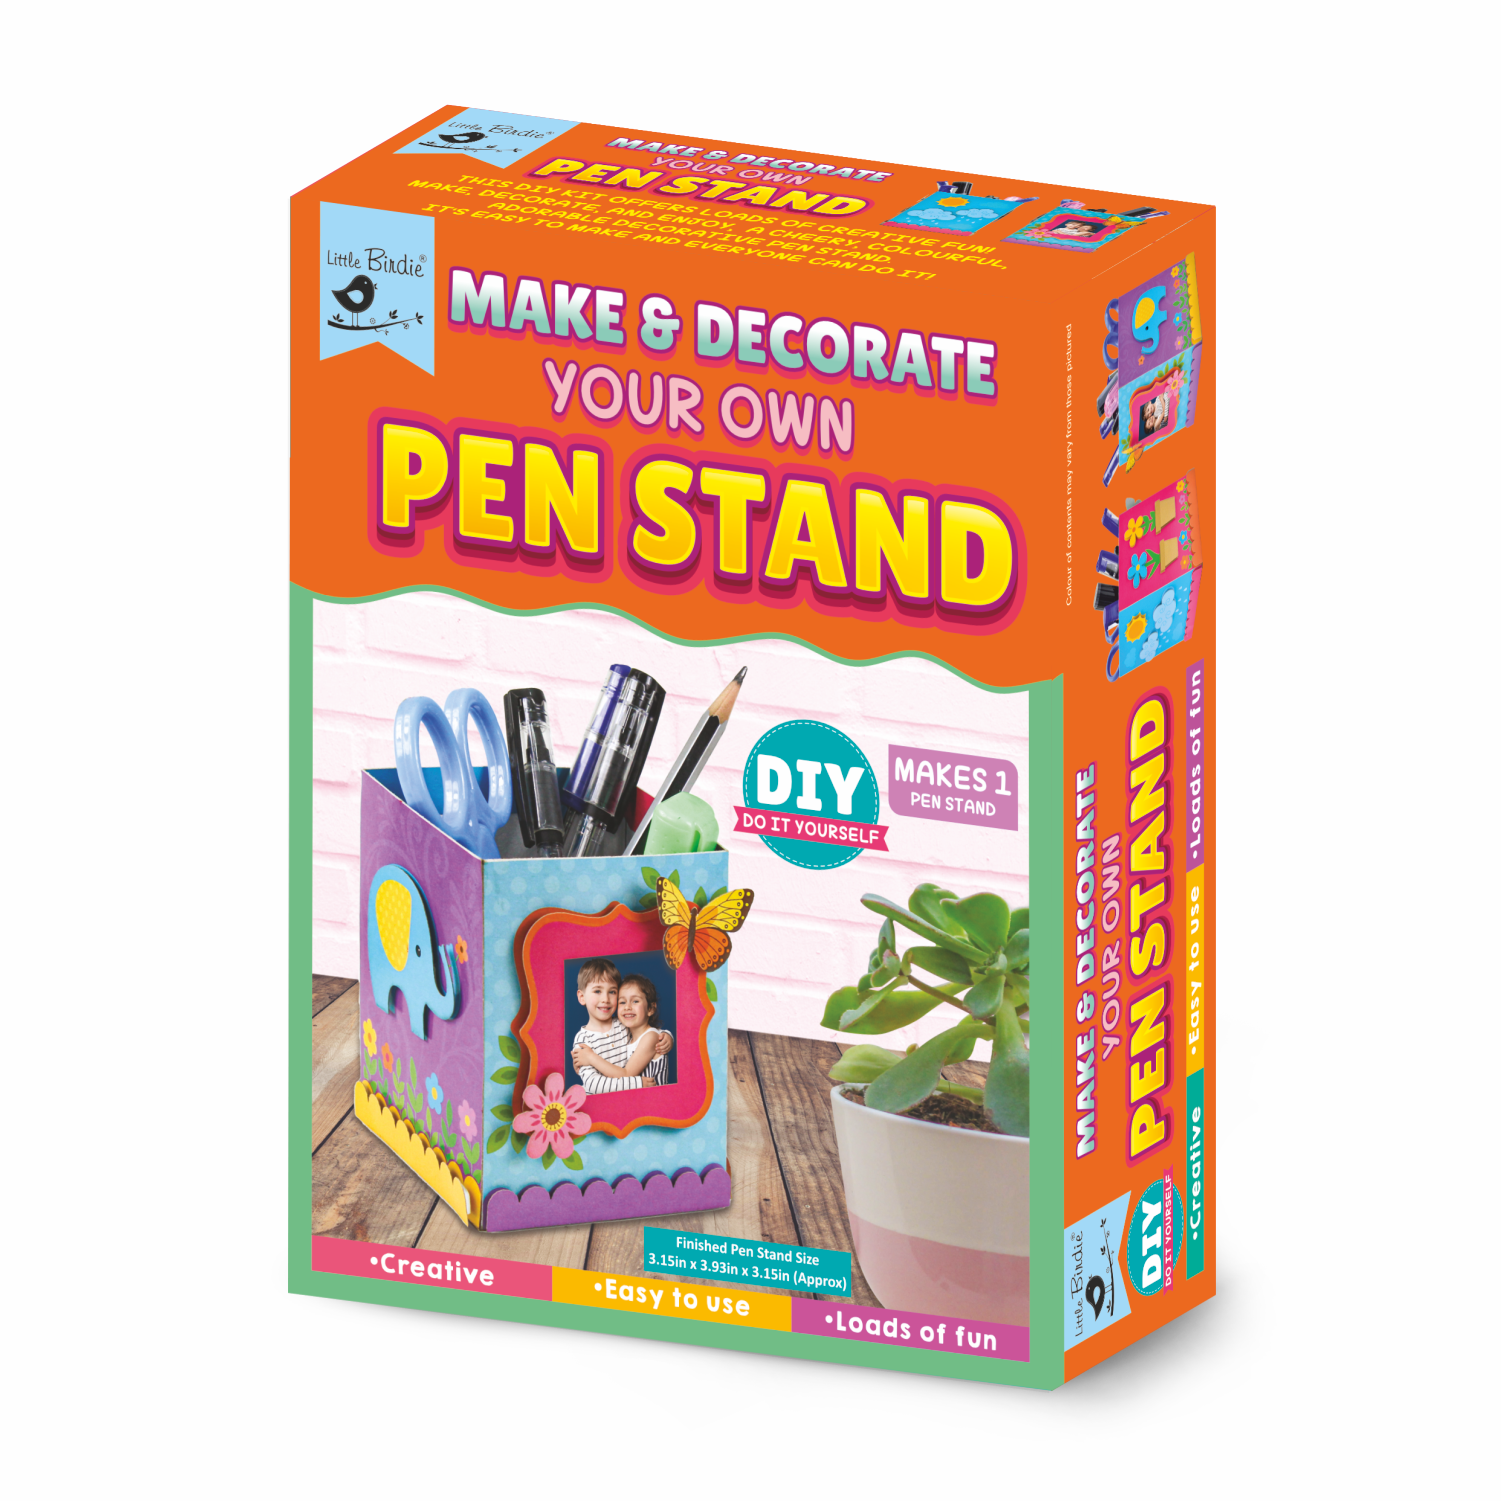 Diy Make And Decorate Your Own Pen Stand Kit 1 Box